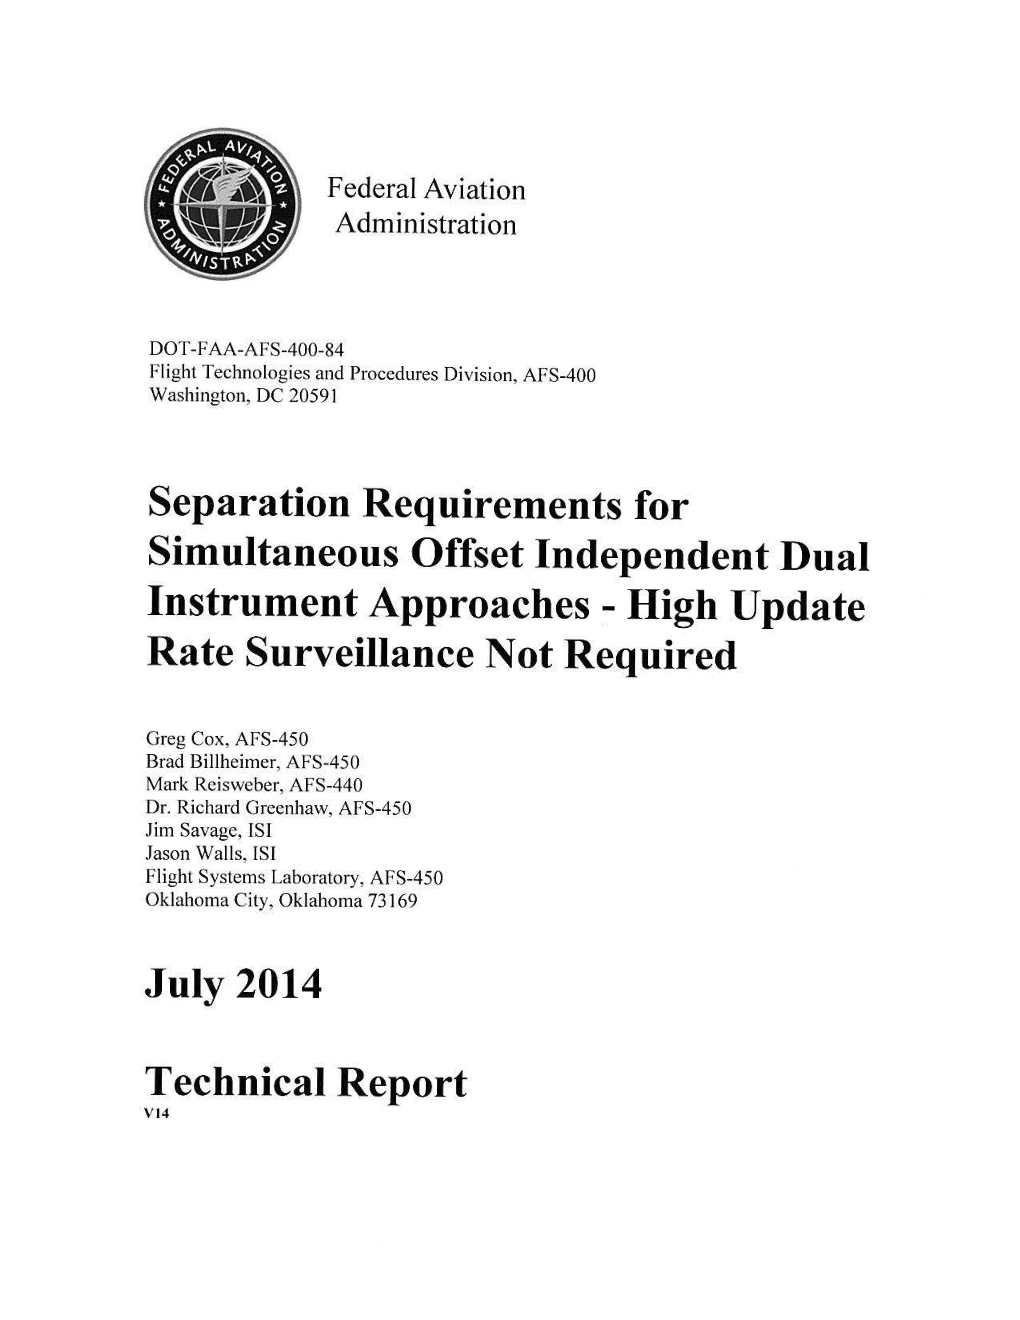 Separation Requirements for Simultaneous Offset Independent Dual Instrument Approaches - High Update Rate Surveillance Not Required